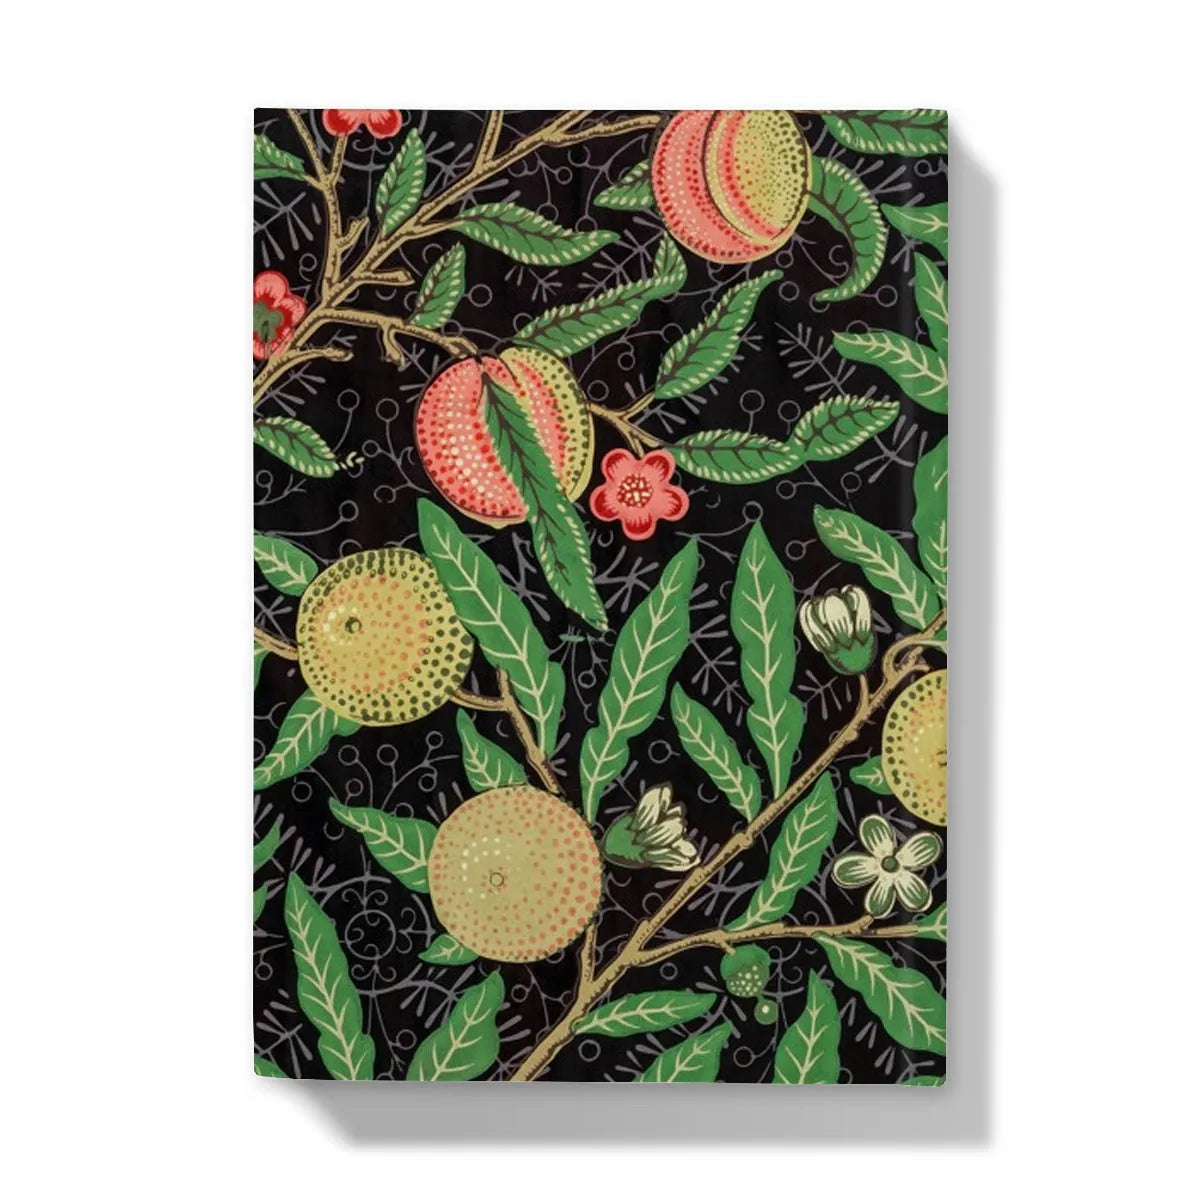 Four Fruits By William Morris Hardback Journal - Notebooks & Notepads - Aesthetic Art